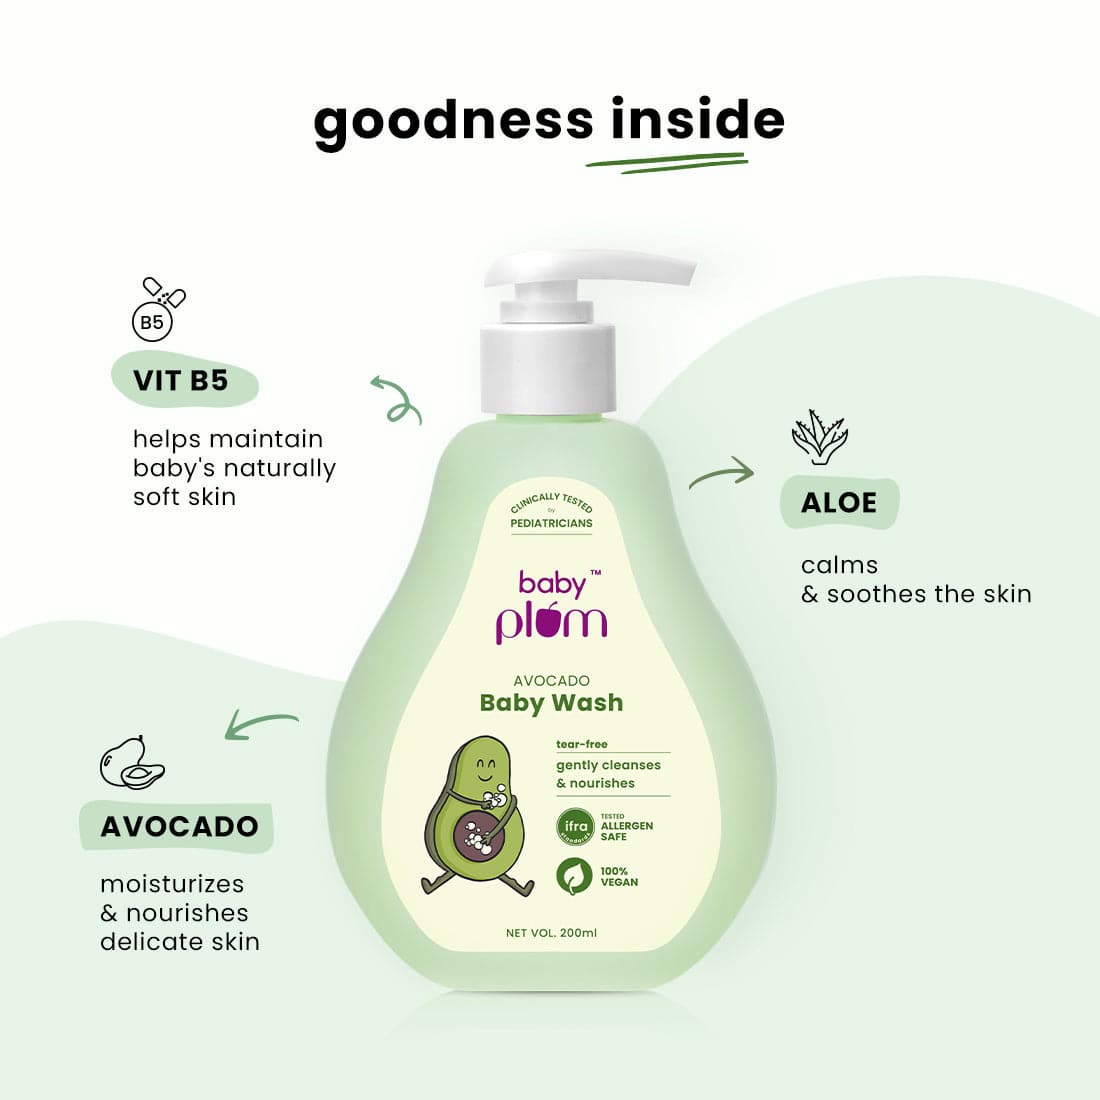 Baby Plum Avocado Baby Wash | Gently Cleanses & Nourishes Baby Skin | Clinically Tested by Pediatricians | Tear-free & pH-balanced Formula | Tested Allergen Safe